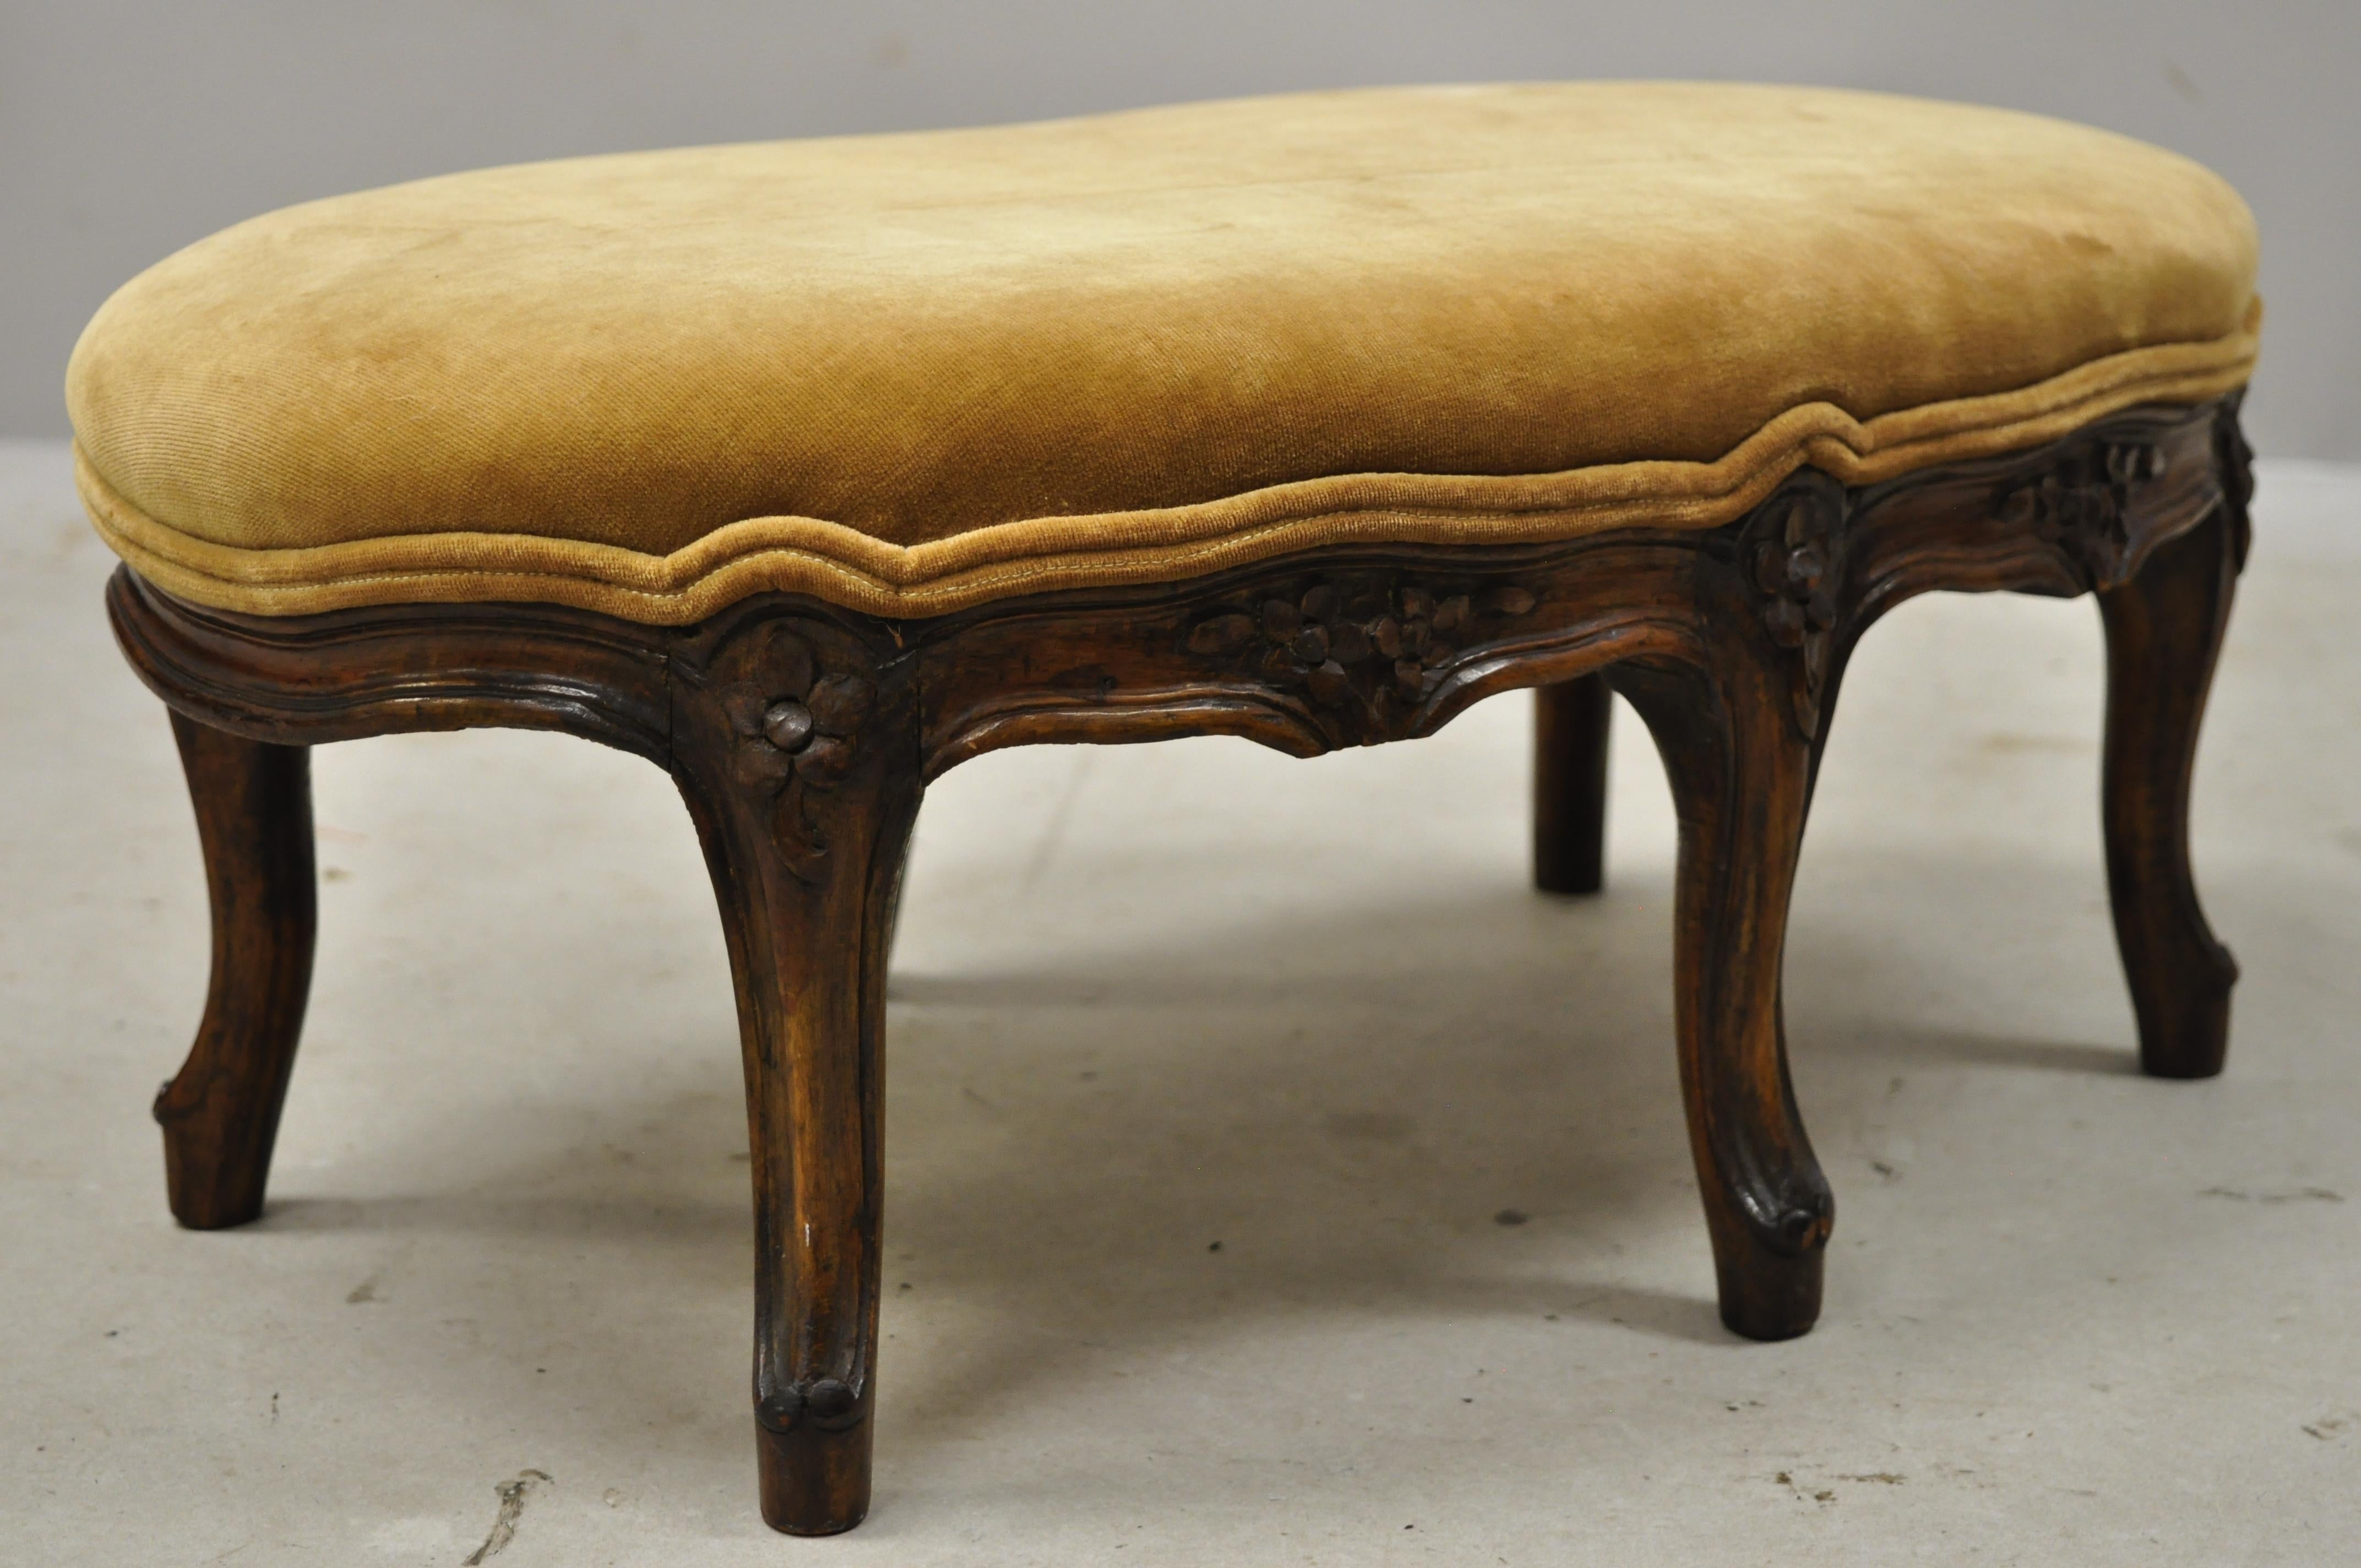 Antique French country Louis XV Provincial walnut small petite oval footstool ottoman. Item features a nice oval size, solid wood frame, nicely carved details, 6 cabriole legs, very nice antique item, circa early 1900s. Measurements: 9.5